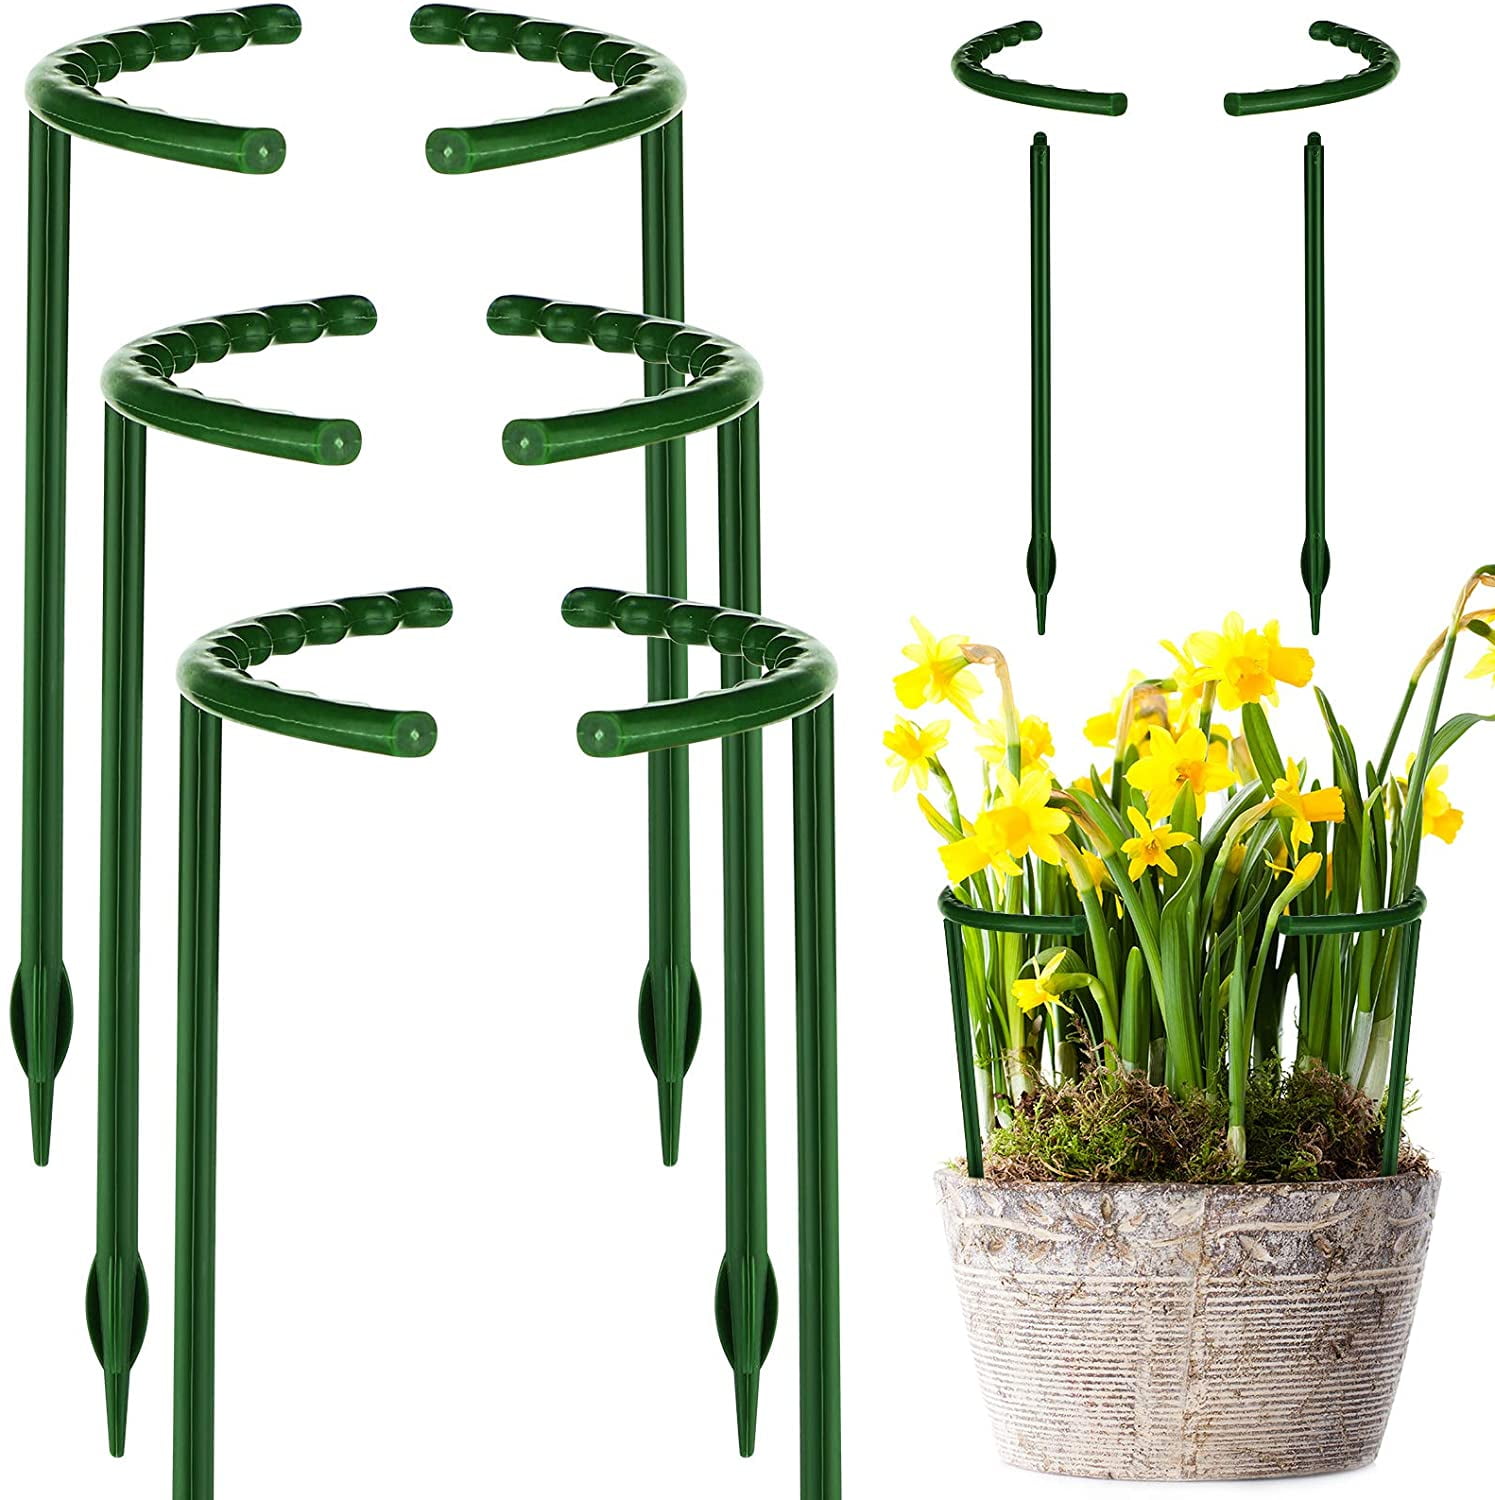 6 Pcs Plant Stem Support Stakes Trellis Gardening Climbing Cages Stand Garden 